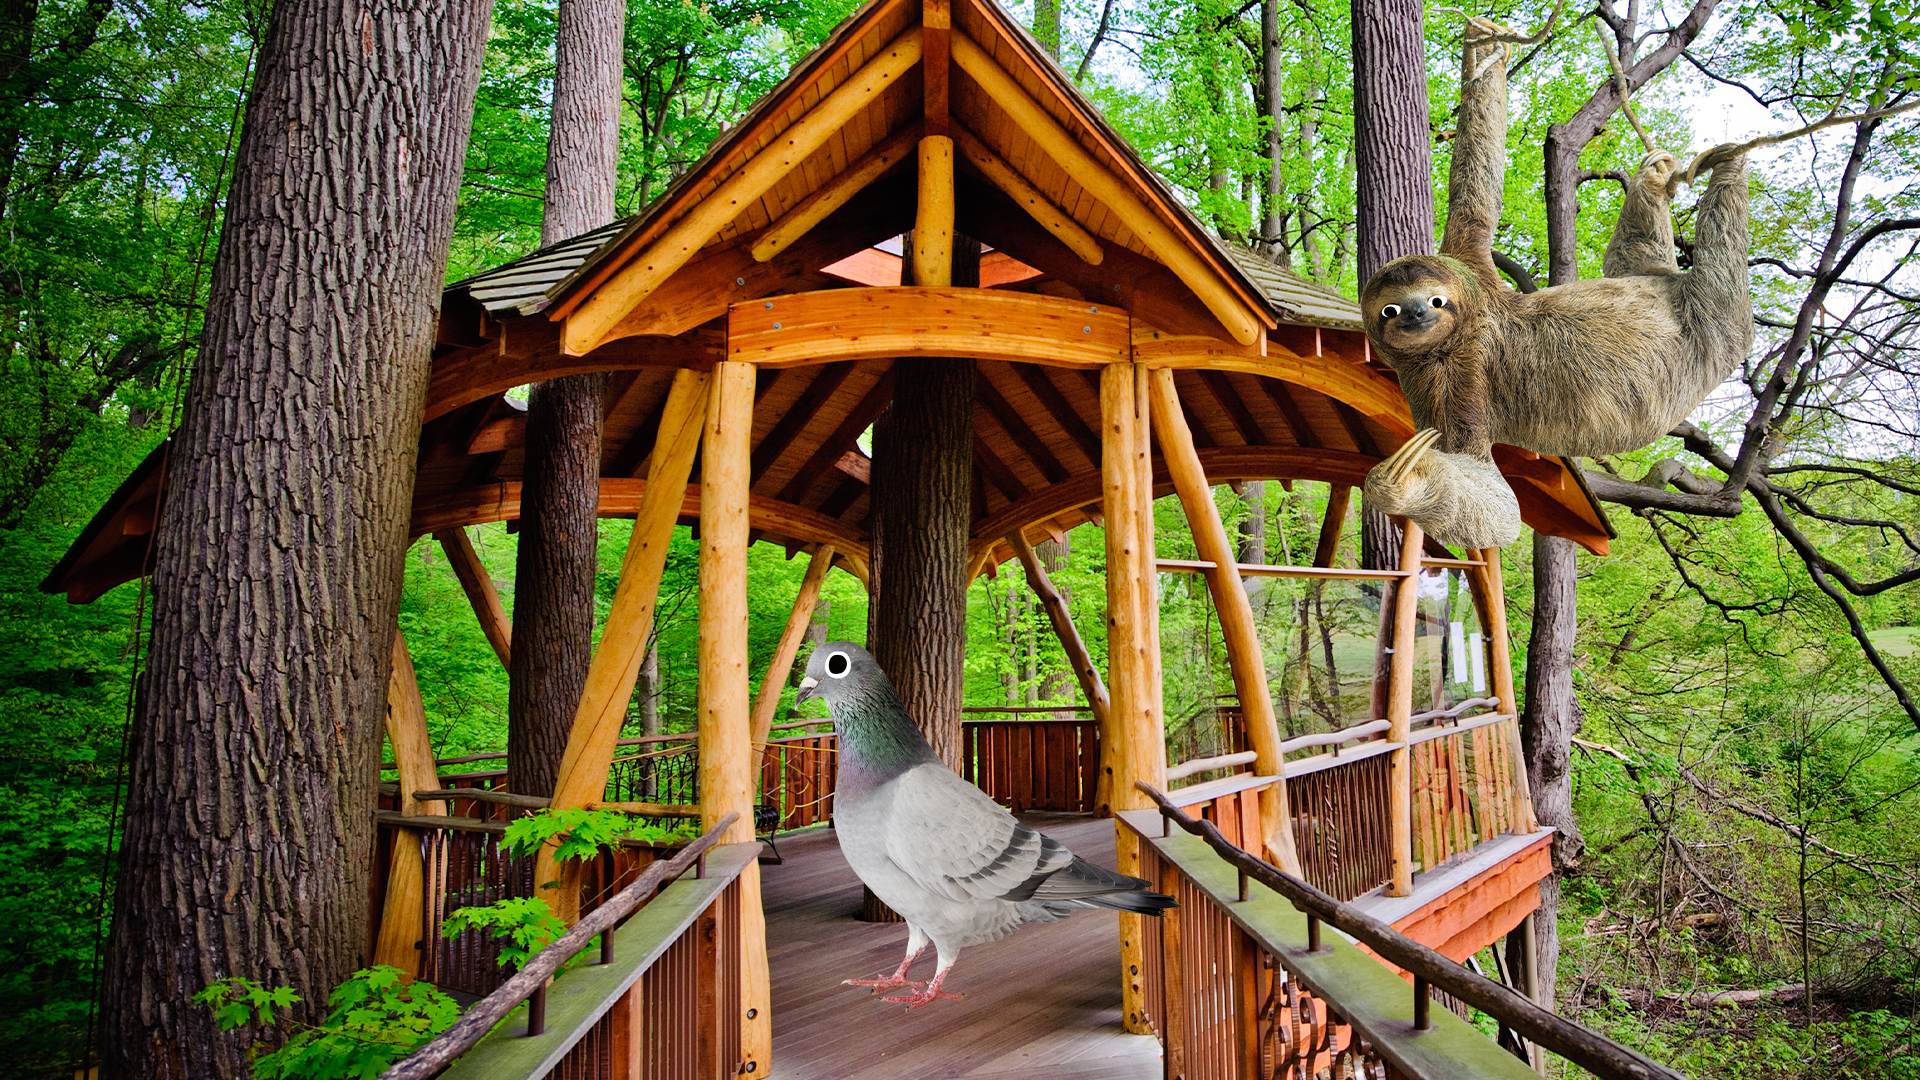 A sloth and a pigeon relax in a treehouse